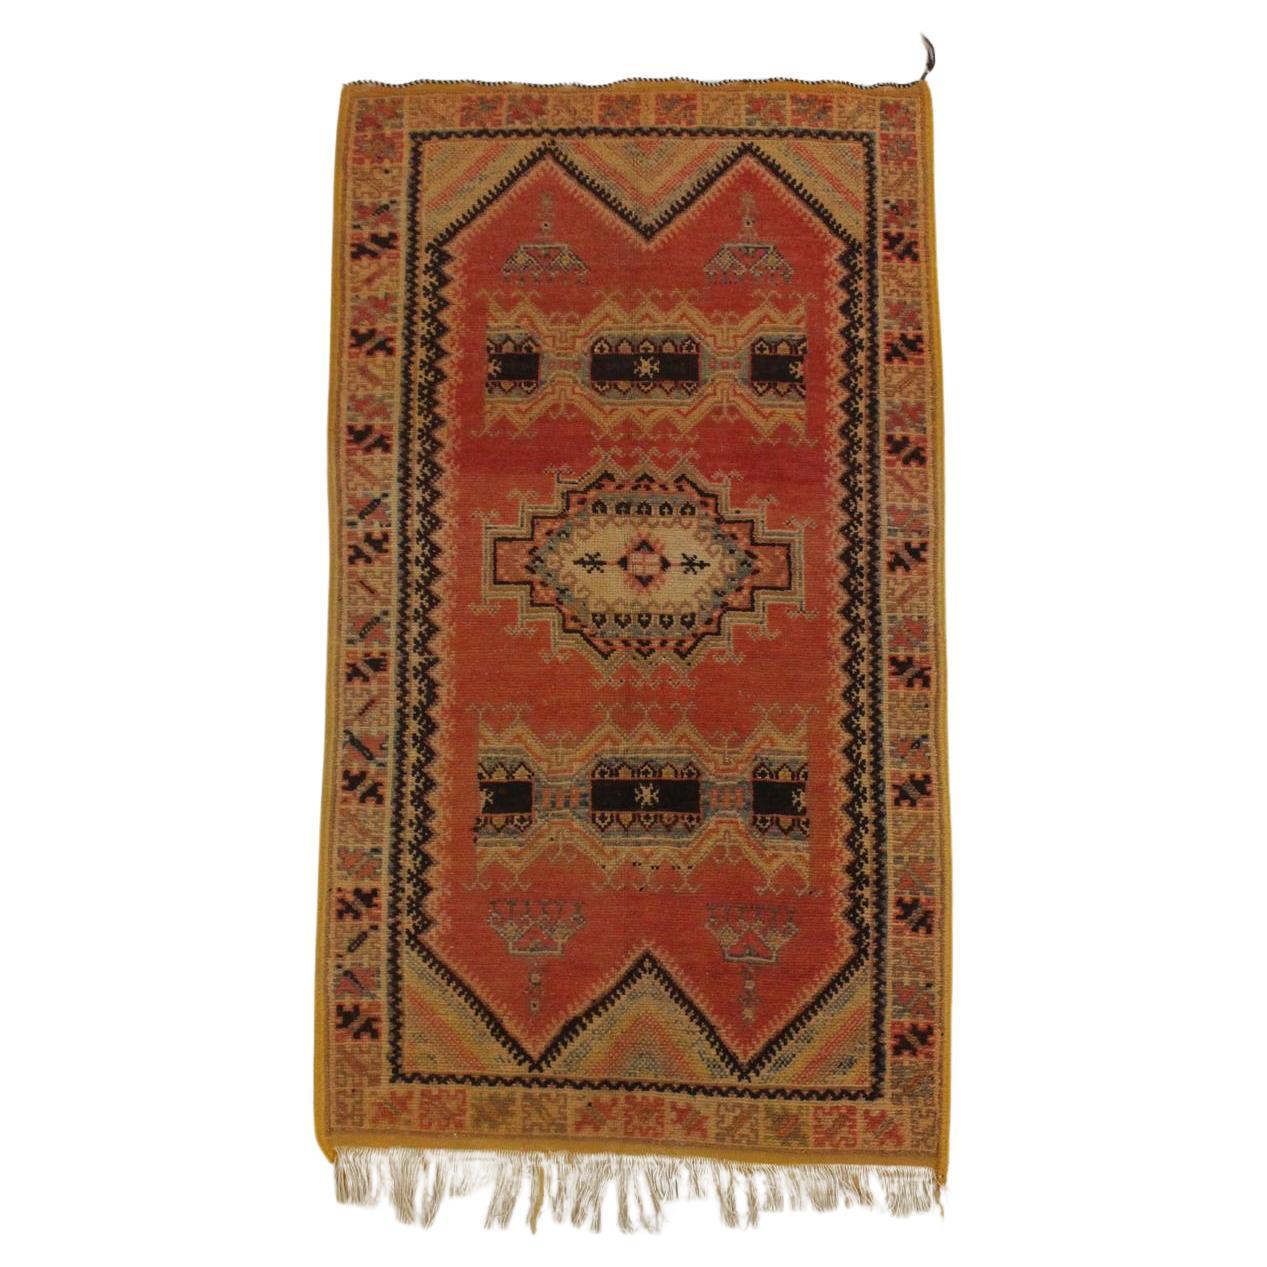 This sweet vintage rug was all handmade by a lady weaver from the Taznakht tribe, South Morocco, still using traditional techniques. Its small size makes it a perfect versatile rug you can move around the house, from your hallway to your bedside or